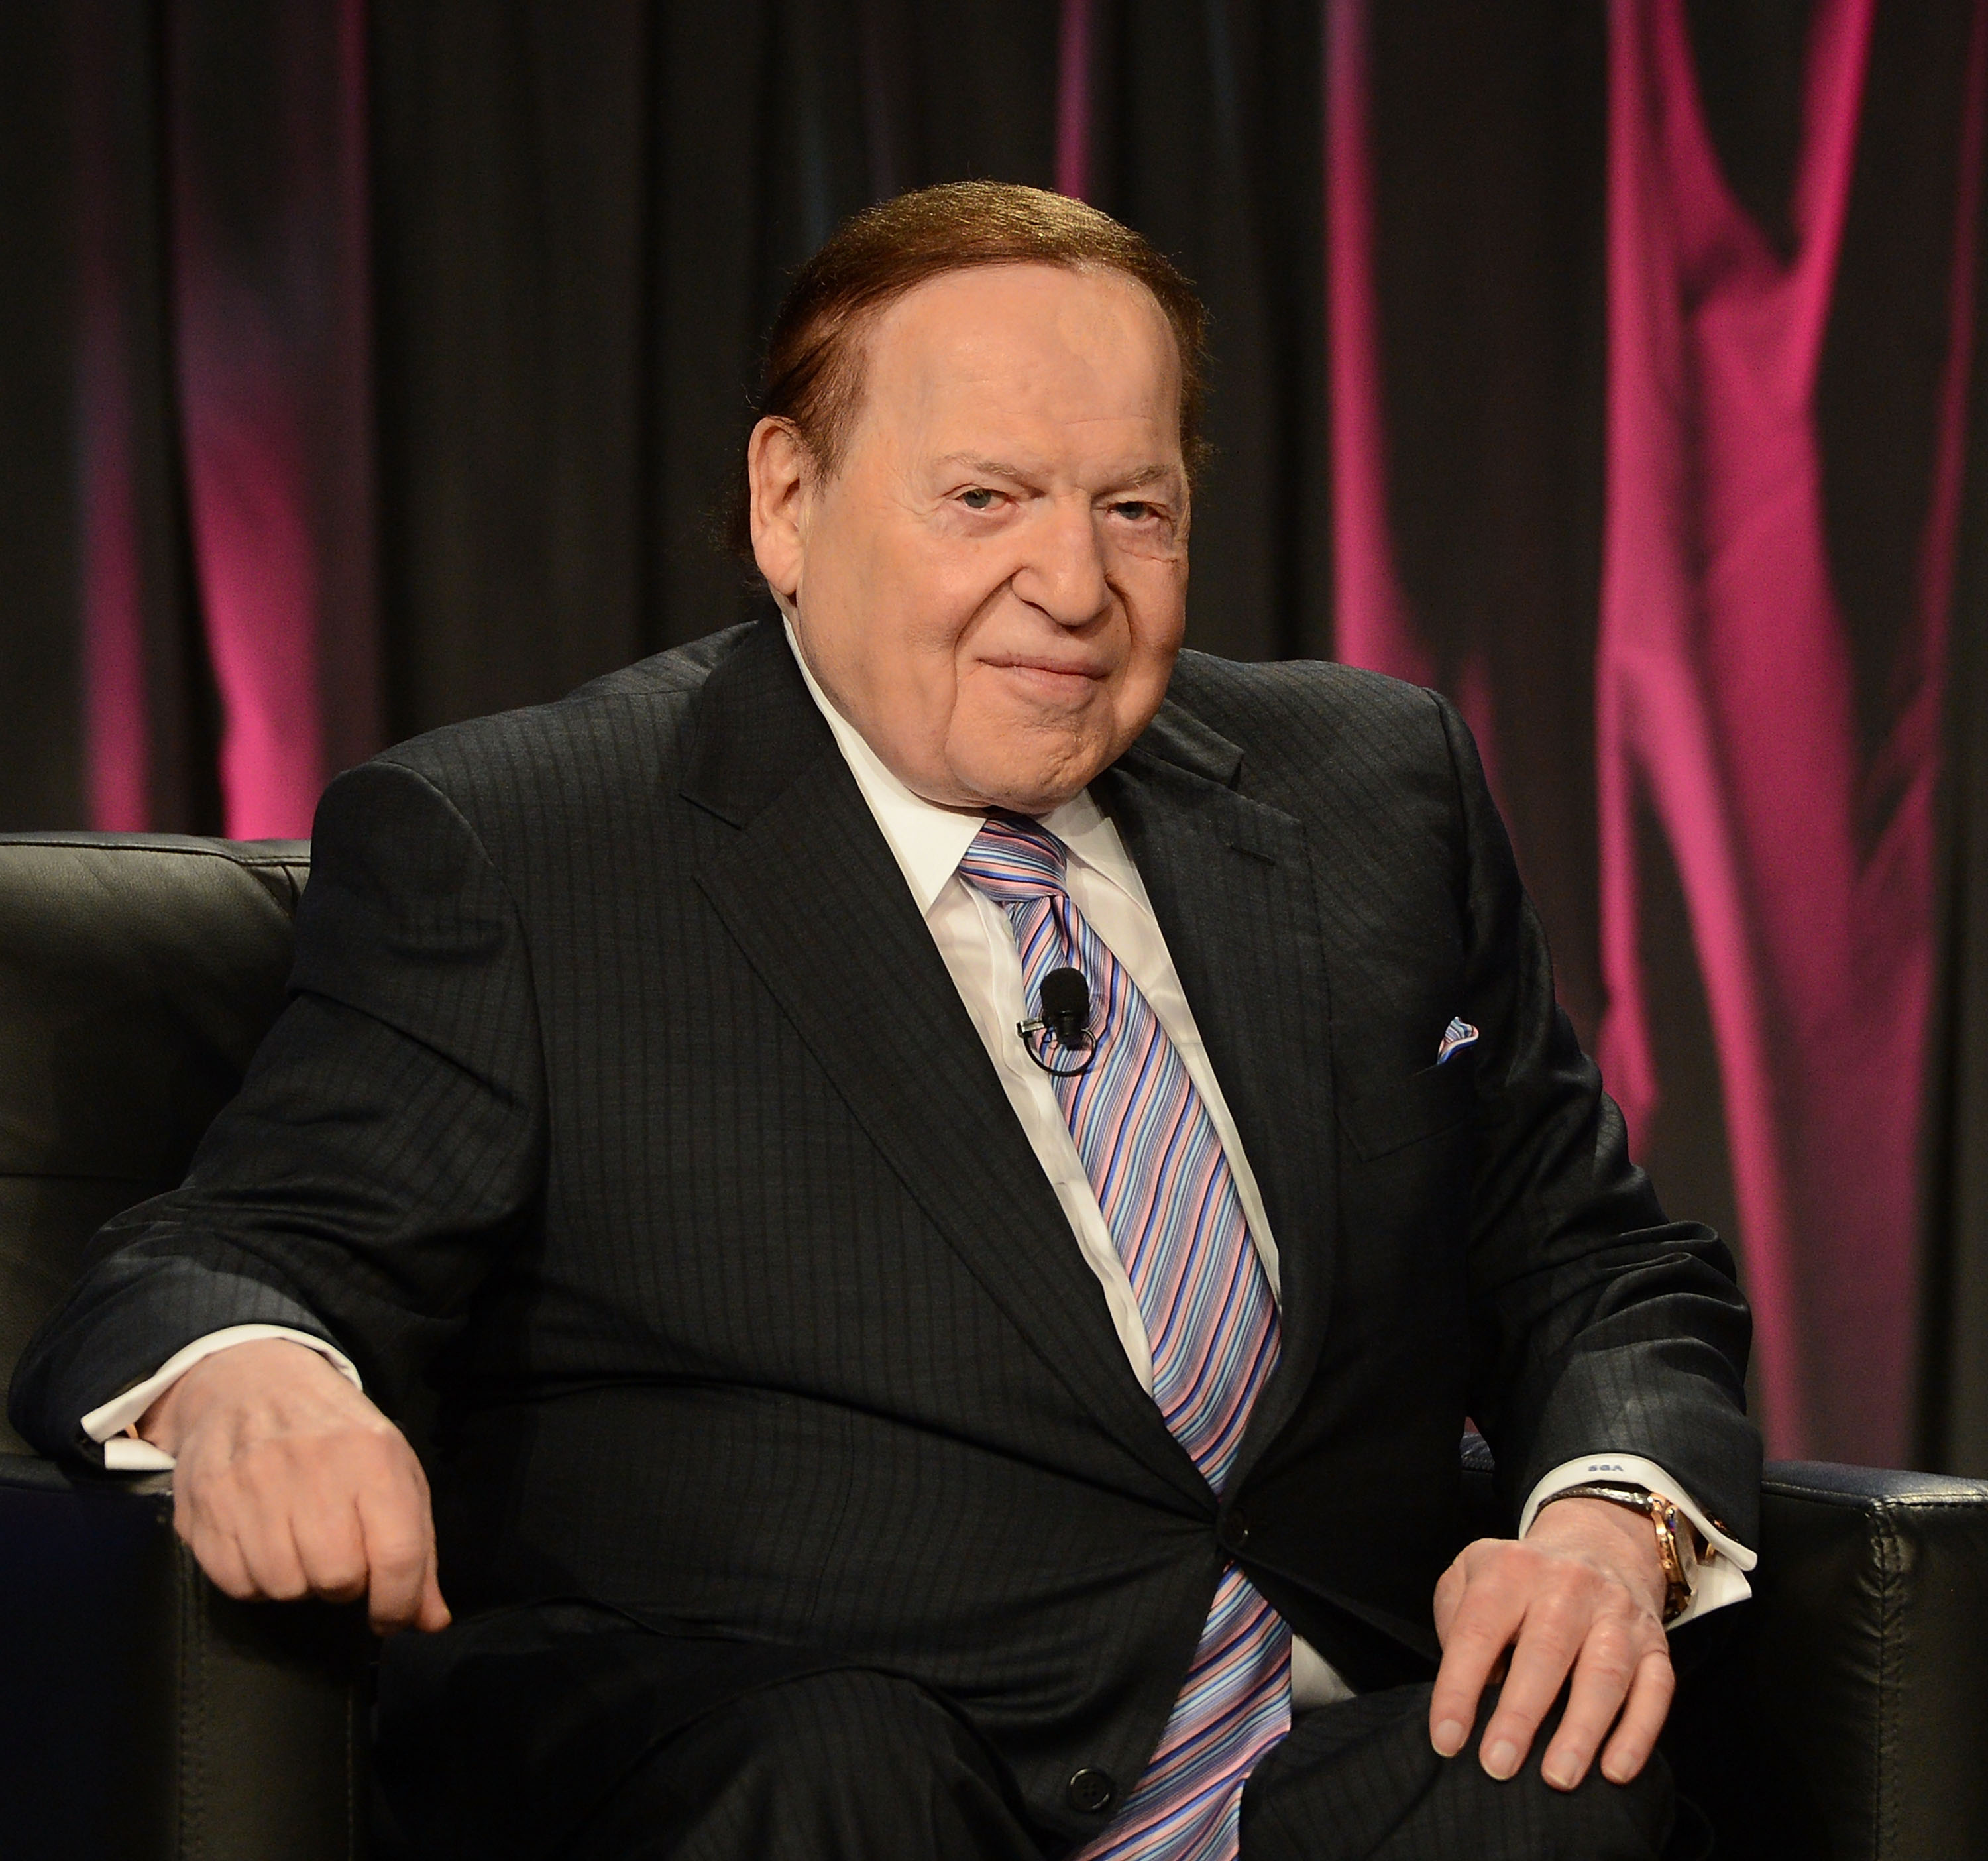 Chairman &amp; CEO of Las Vegas Sands Corp., Sheldon Adelson speaks at the Exclusive Seminar: Keynote at the 14th Annual Global Gaming Expo at the Sands Expo and Convention Center on Oct. 1, 2014 in Las Vegas.